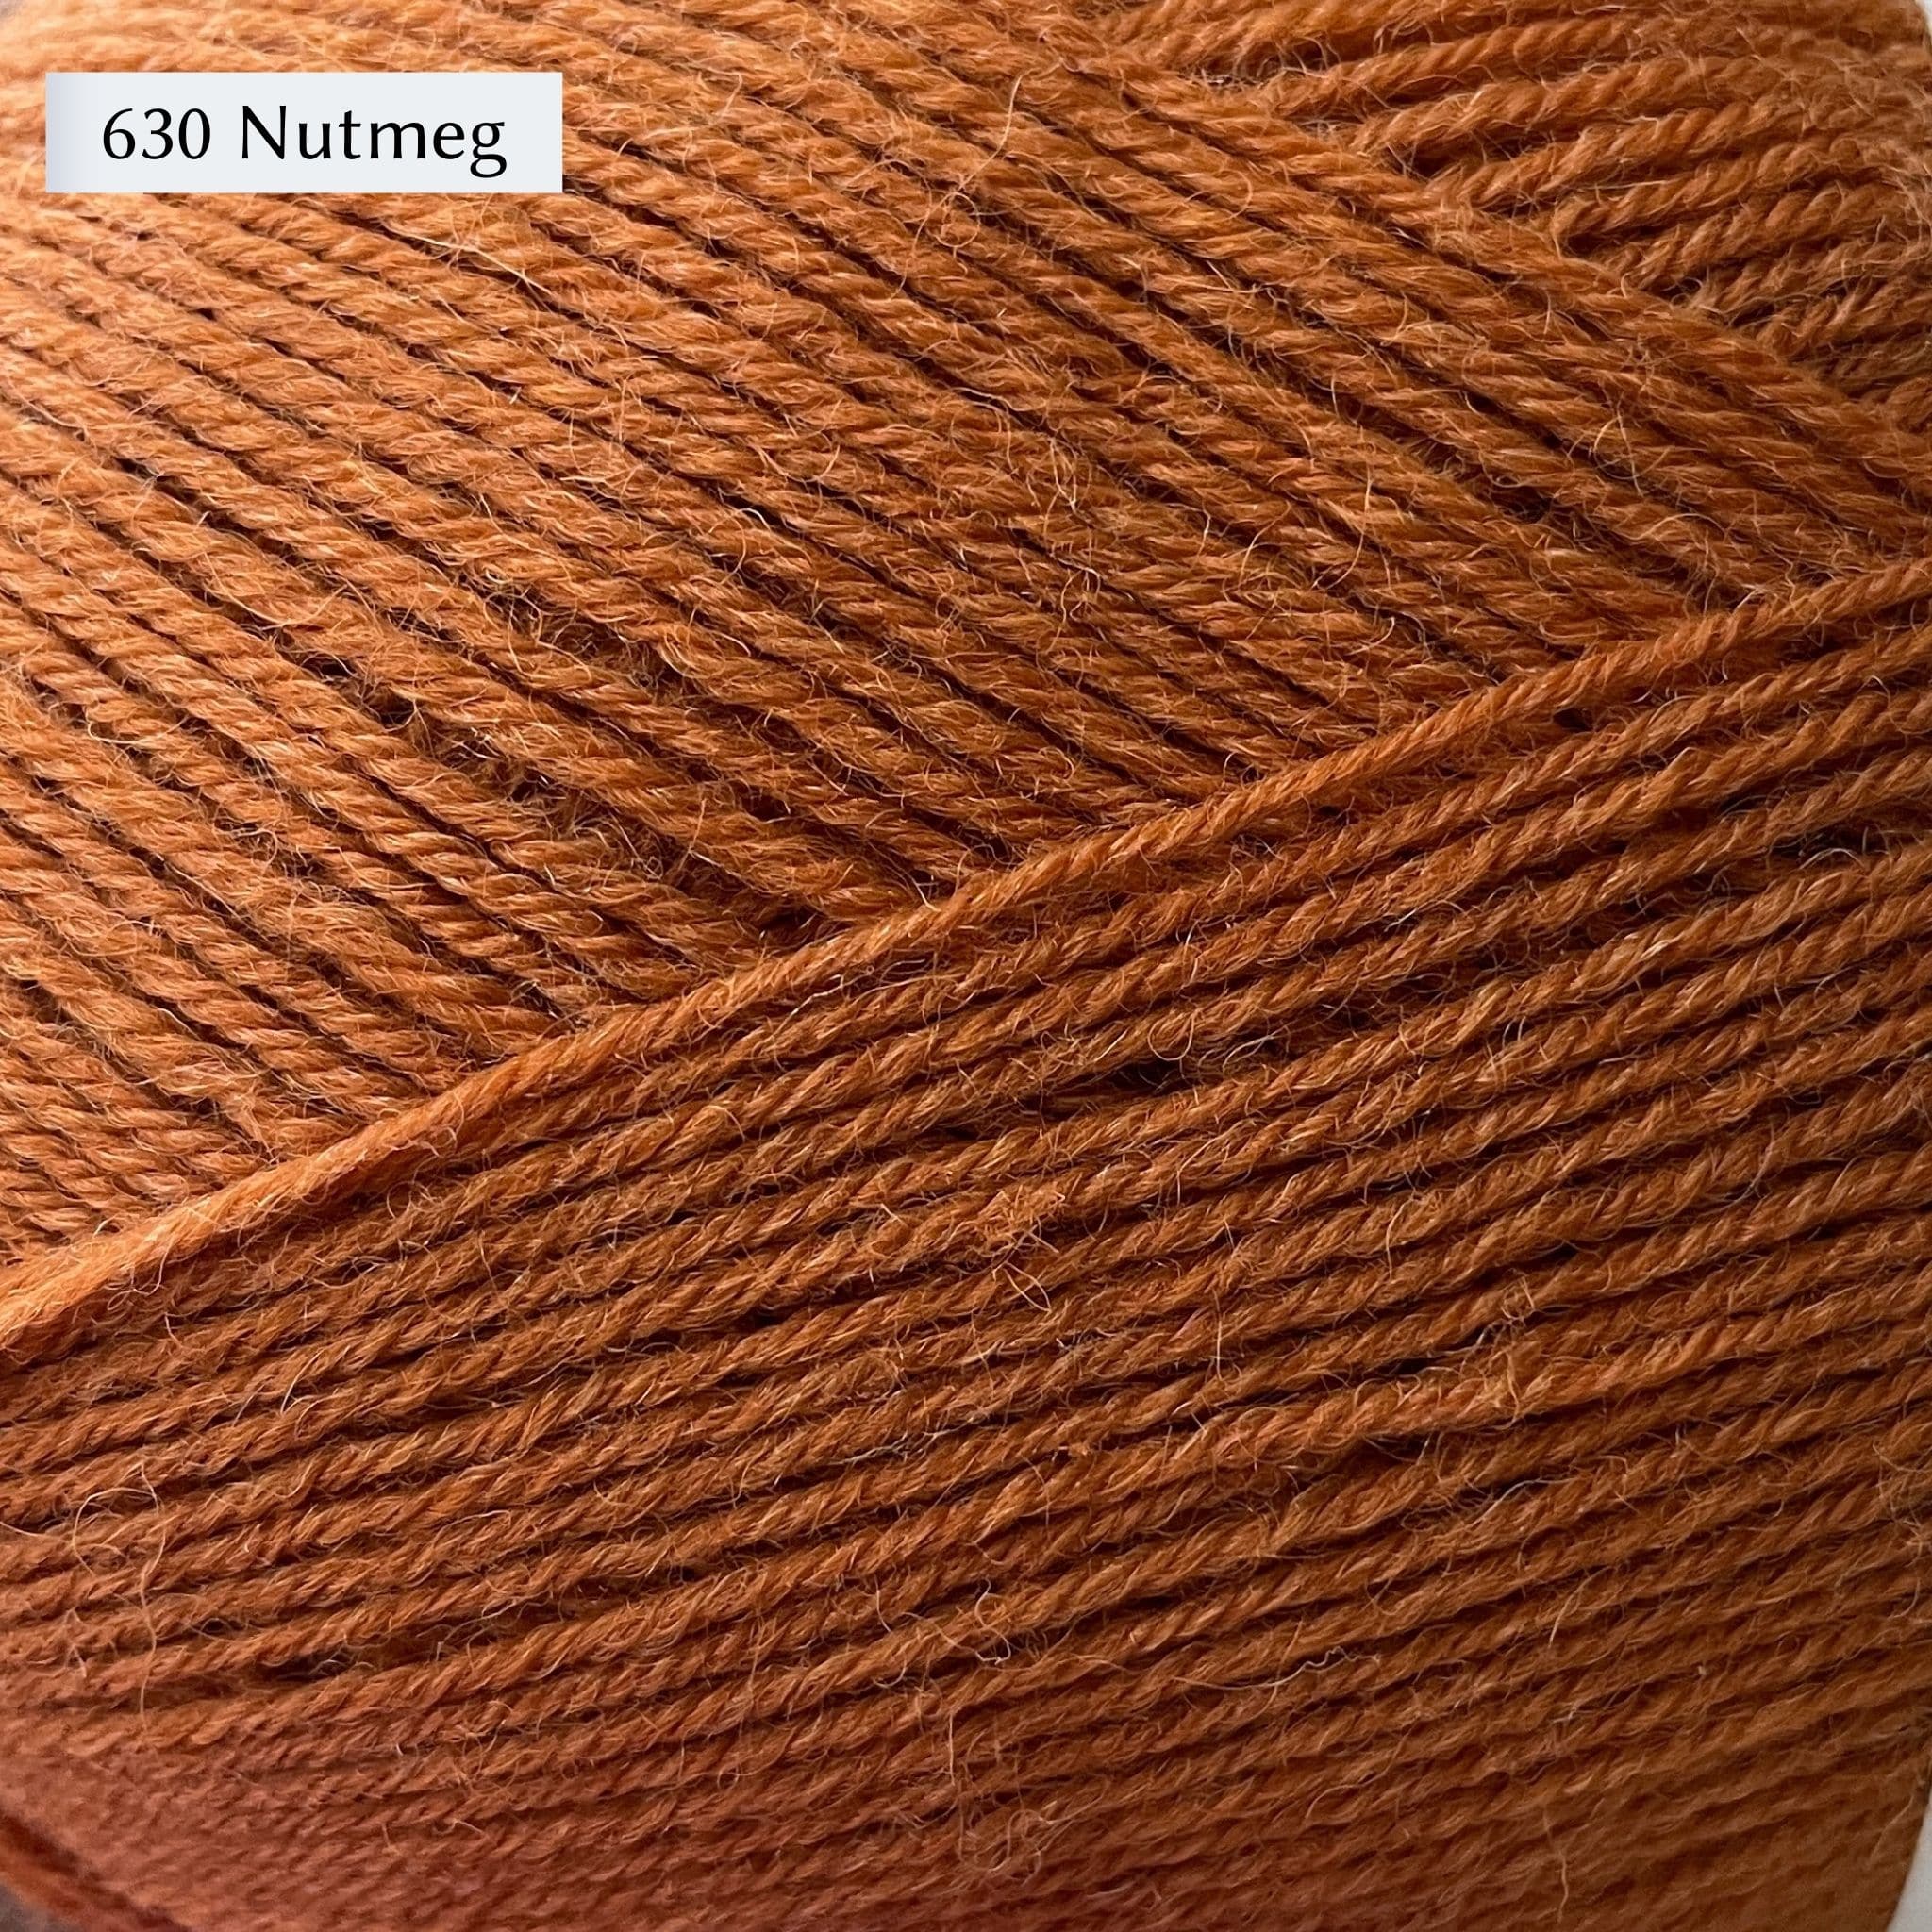 West Yorkshire Spinners Signature 4ply yarn, 100-gram ball, fingering weight, in 630 Nutmeg, a warm, light tobacco brown